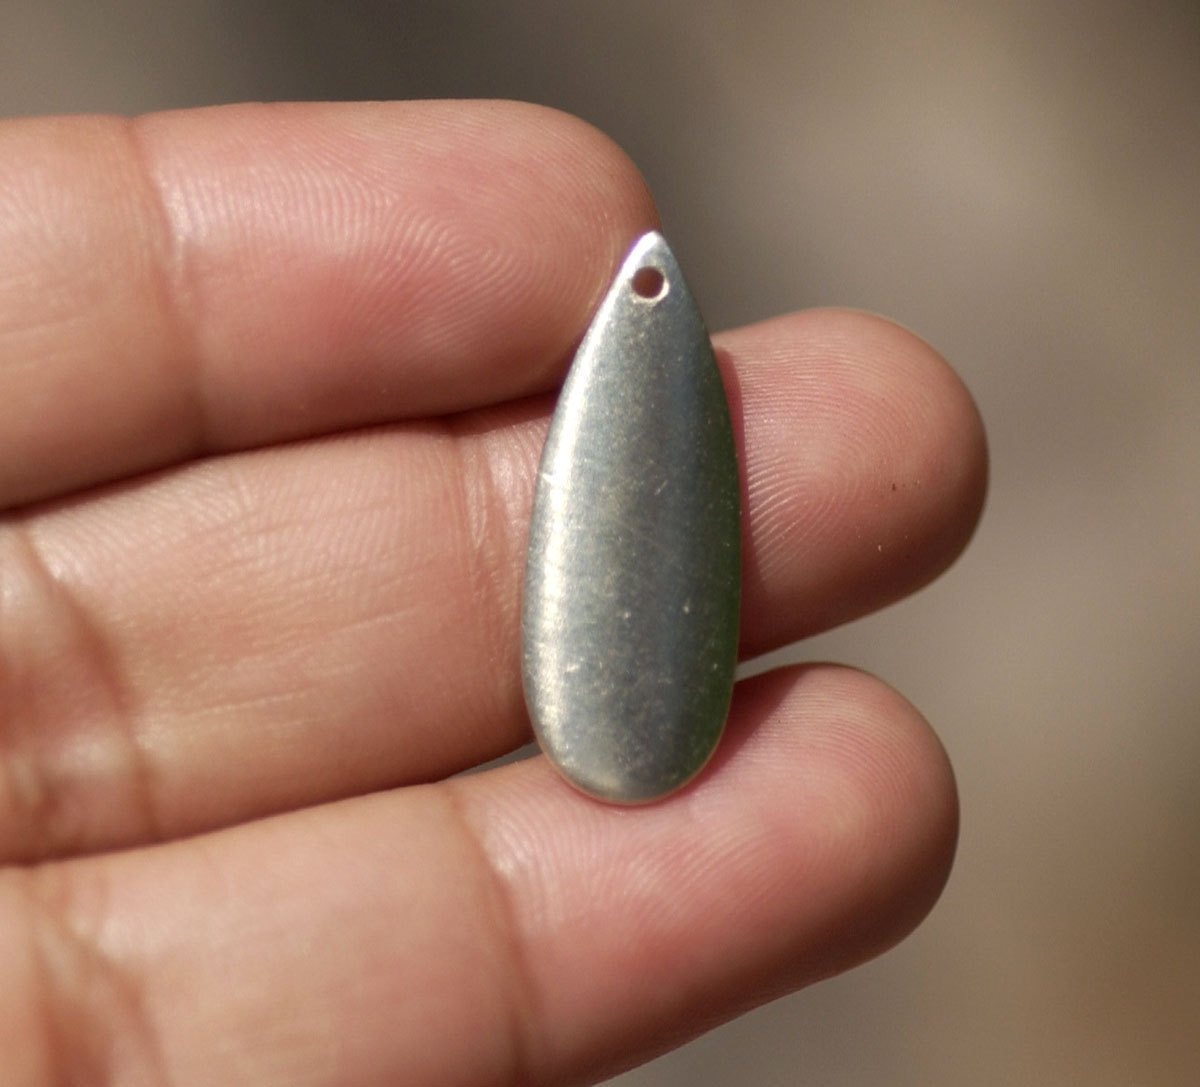 Nickel Silver Blank Teardrop Curved Leaf  with Hole 20g 24 x 10mm Cutout for Blanks Enameling Stamping Texturing - 4 pieces